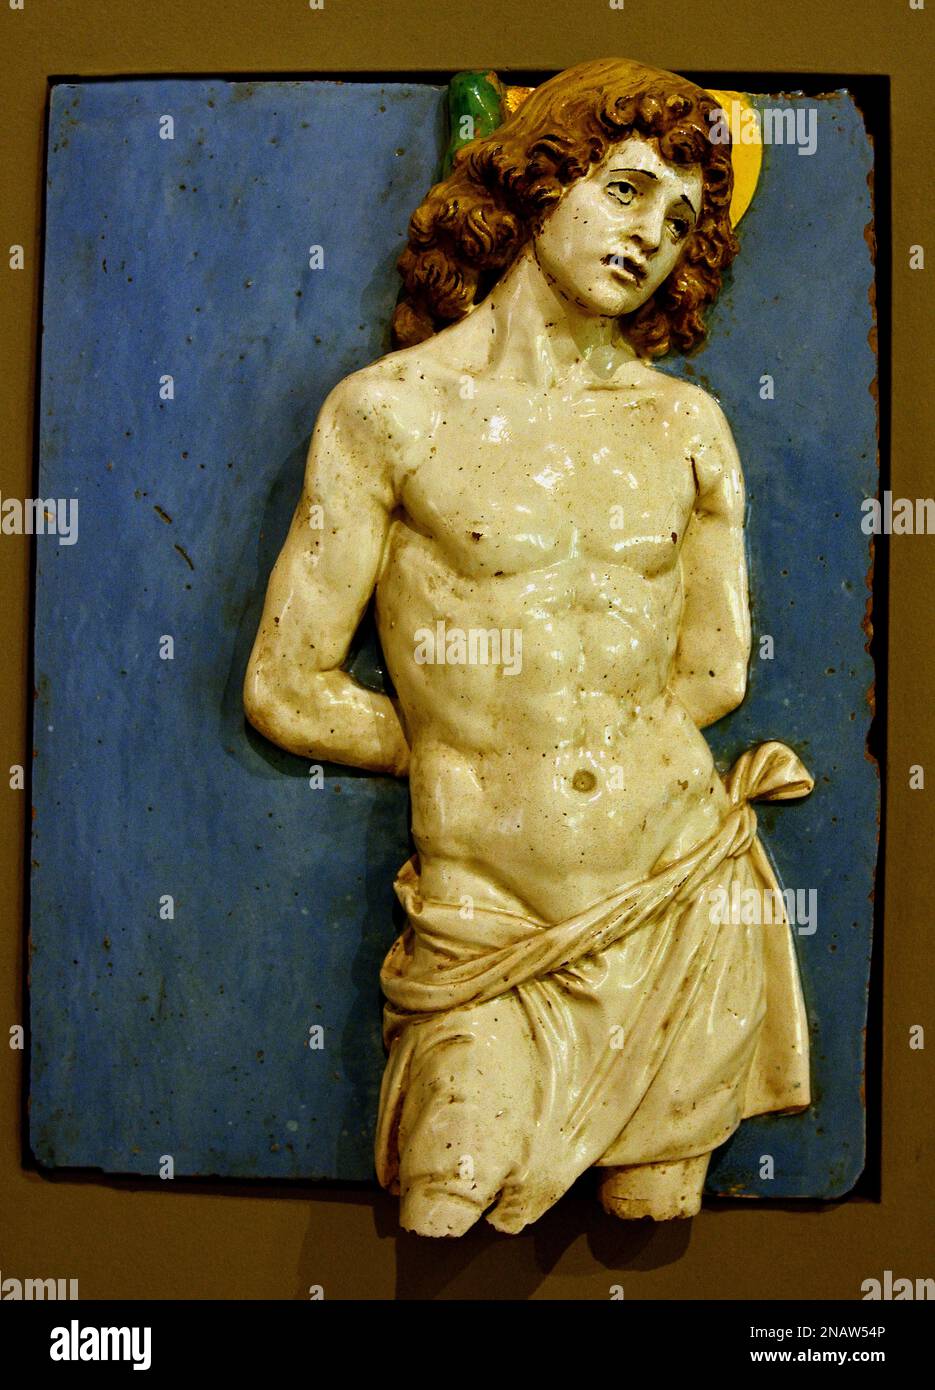 San Sebastiano - Saint Sebastian  1450 15th Century by workshop  Andrea della Robbia, Fine Art Museum, Italy, Italian, Saint, Sebastian, (died c. 268 AD),  Christian saint and martyr,  Killed during the Roman, Emperor, Diocletian, persecution of Christians, He criticized the emperor, clubbed to death ) Stock Photo